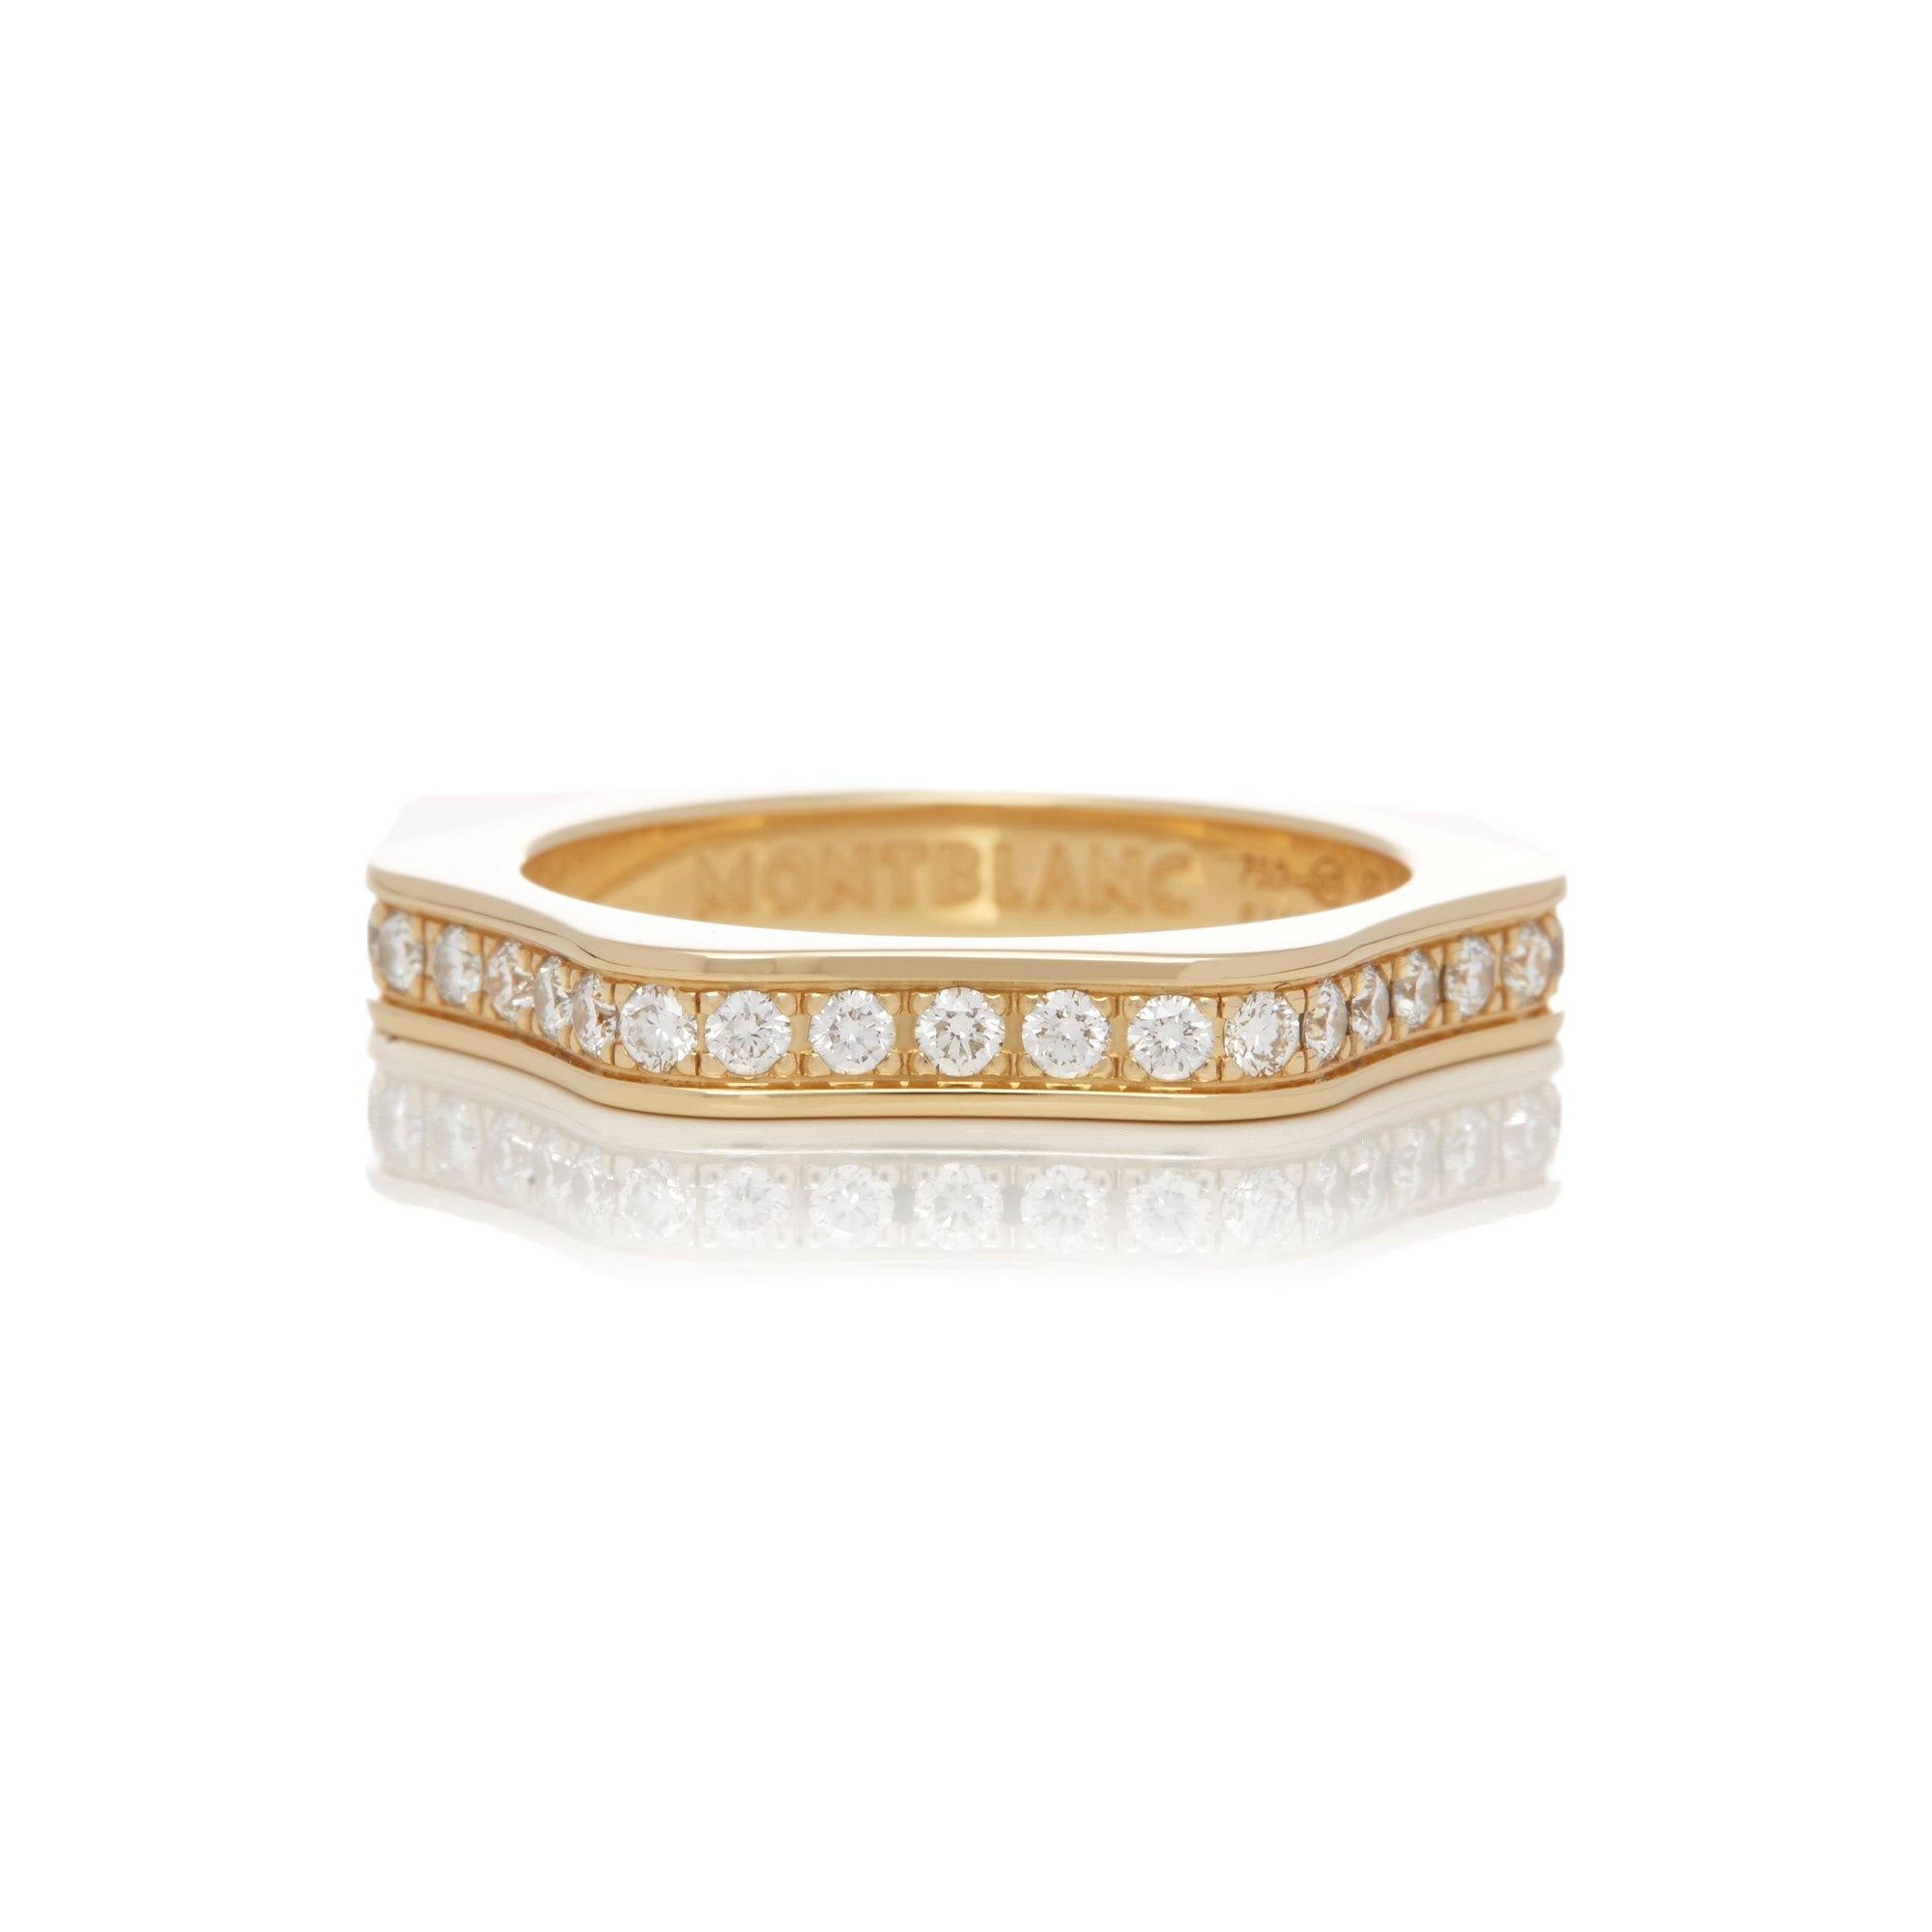 This Ring by Montblanc is from their 4810 Collection and features Thirty Seven Round Brilliant Cut Diamonds totalling 0.74cts mounted in an 18k Yellow Gold band. UK Finger Size O 1/2, EU Size 54, USA Size 7 3/4.  Complete with Montblanc Ring Pouch.